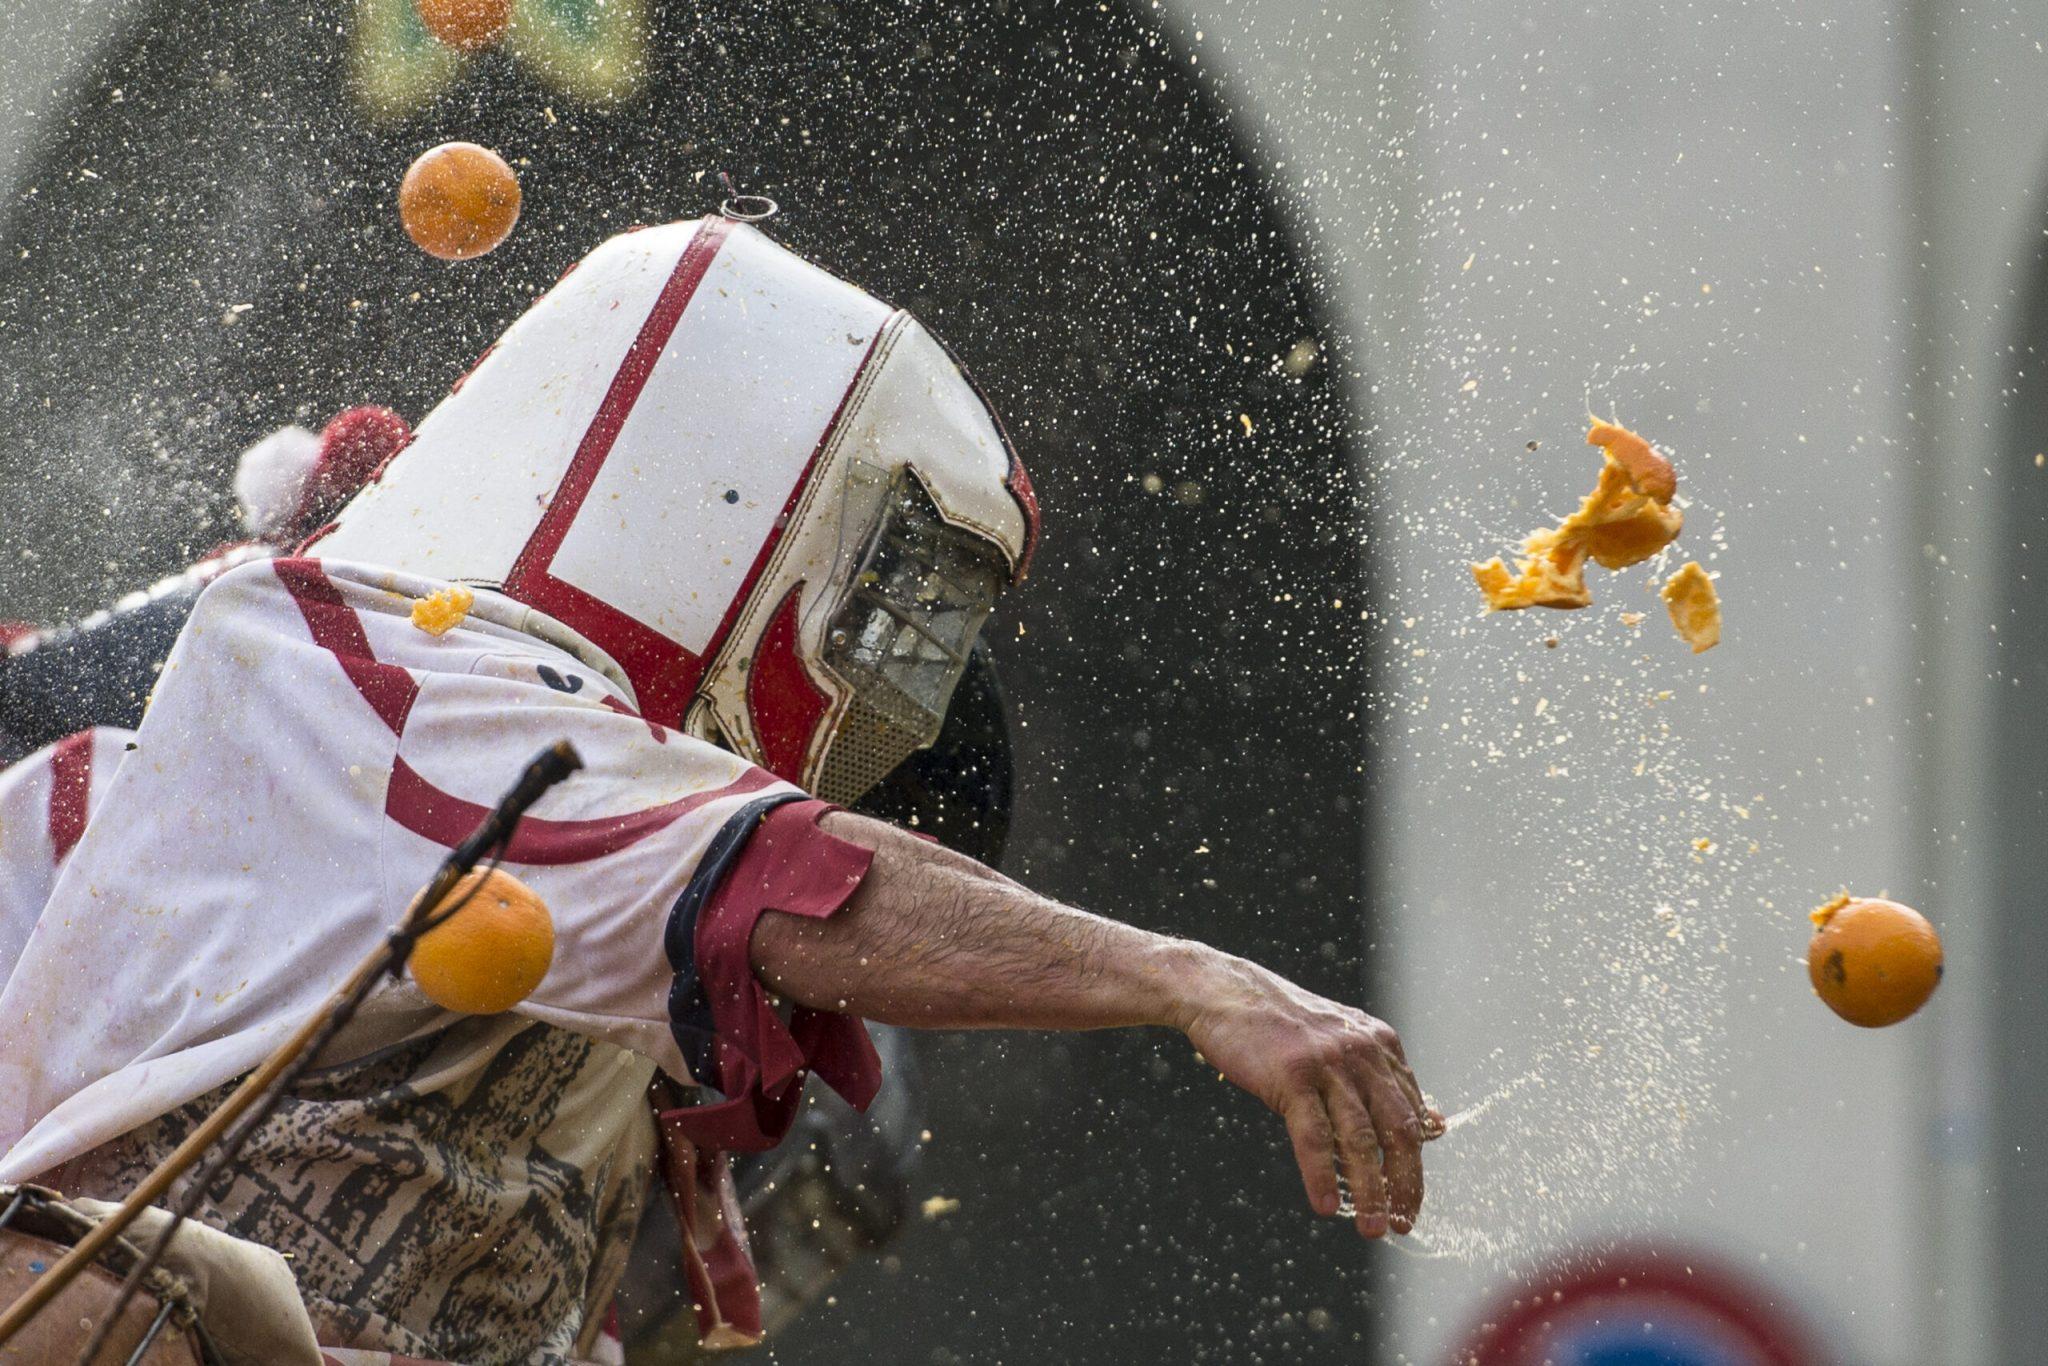 A member of an orange battle team takes part in the traditional ‘battle of the oranges’ held during the traditional battle of the oranges during the Ivrea Carnival near Turin, Italy. Photo and story credits by Stefano Guidi